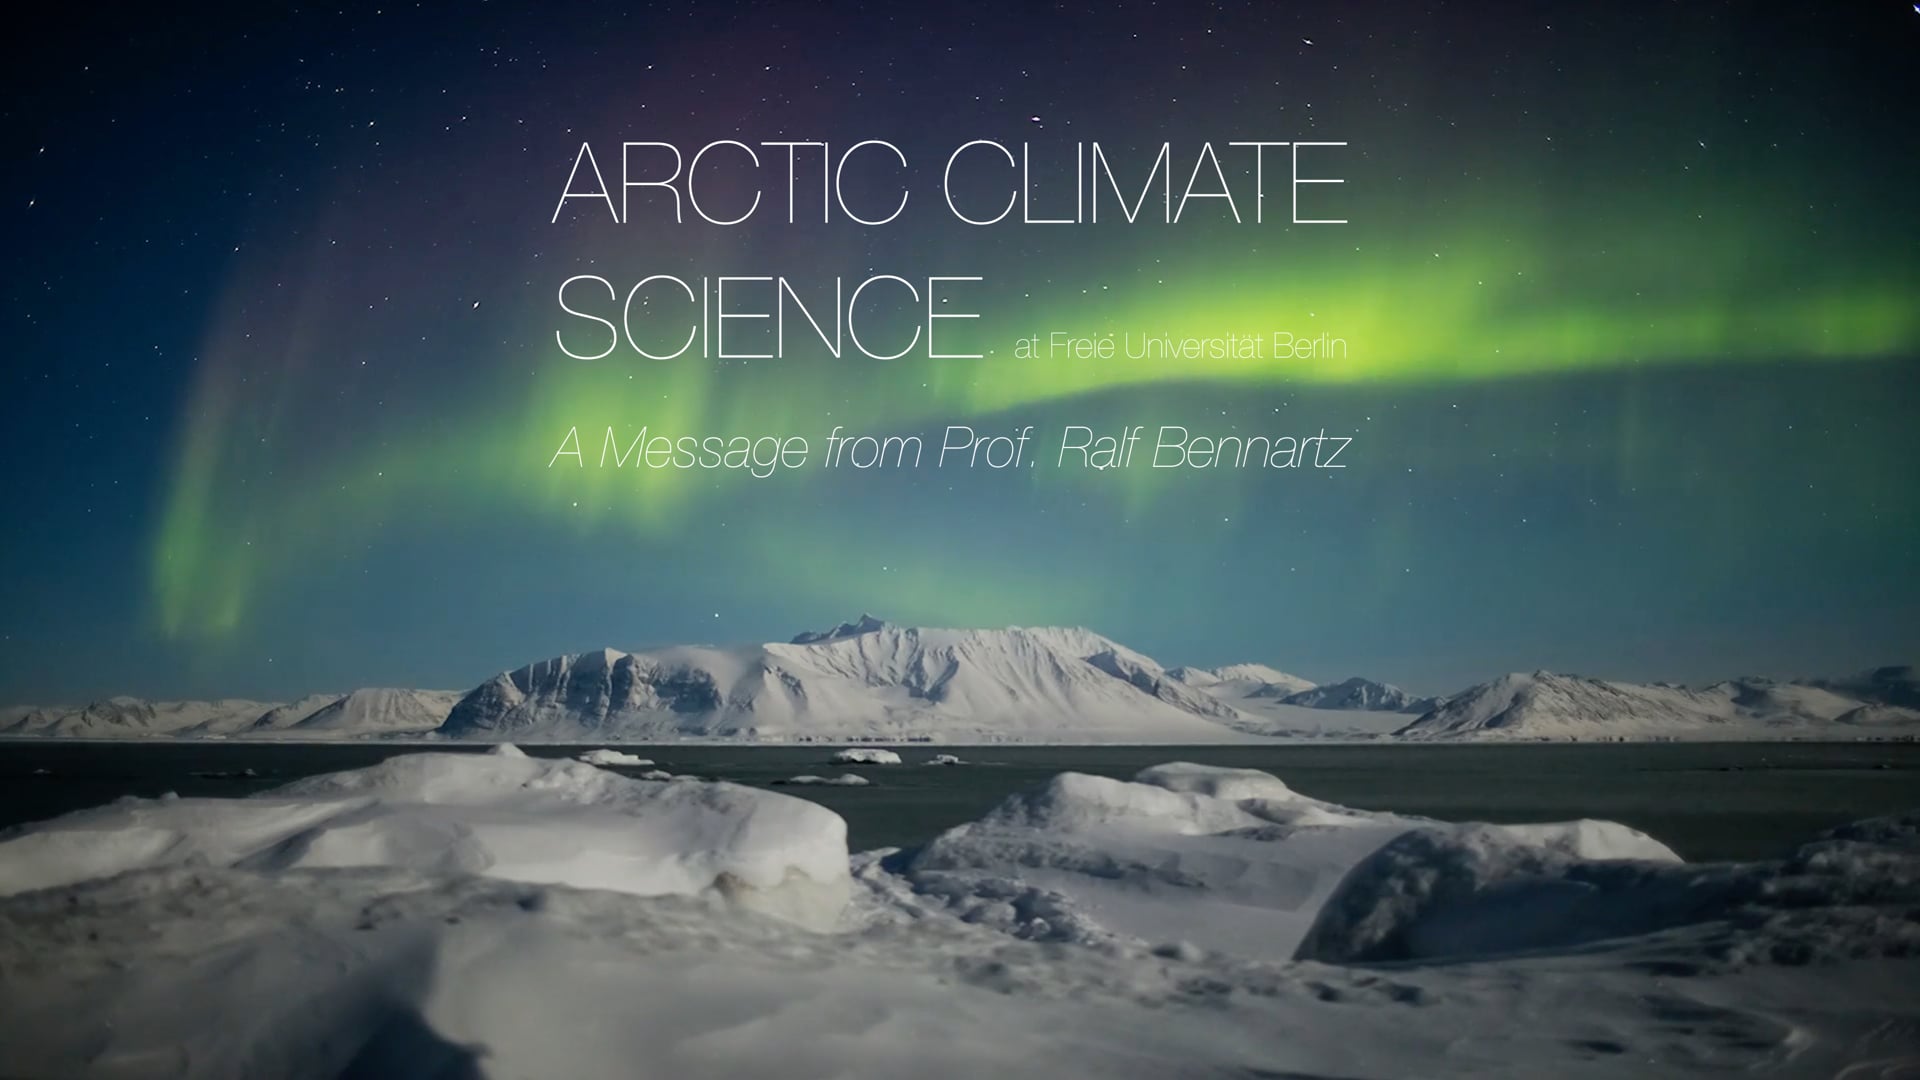 Campaign for University Programme in the Arctic